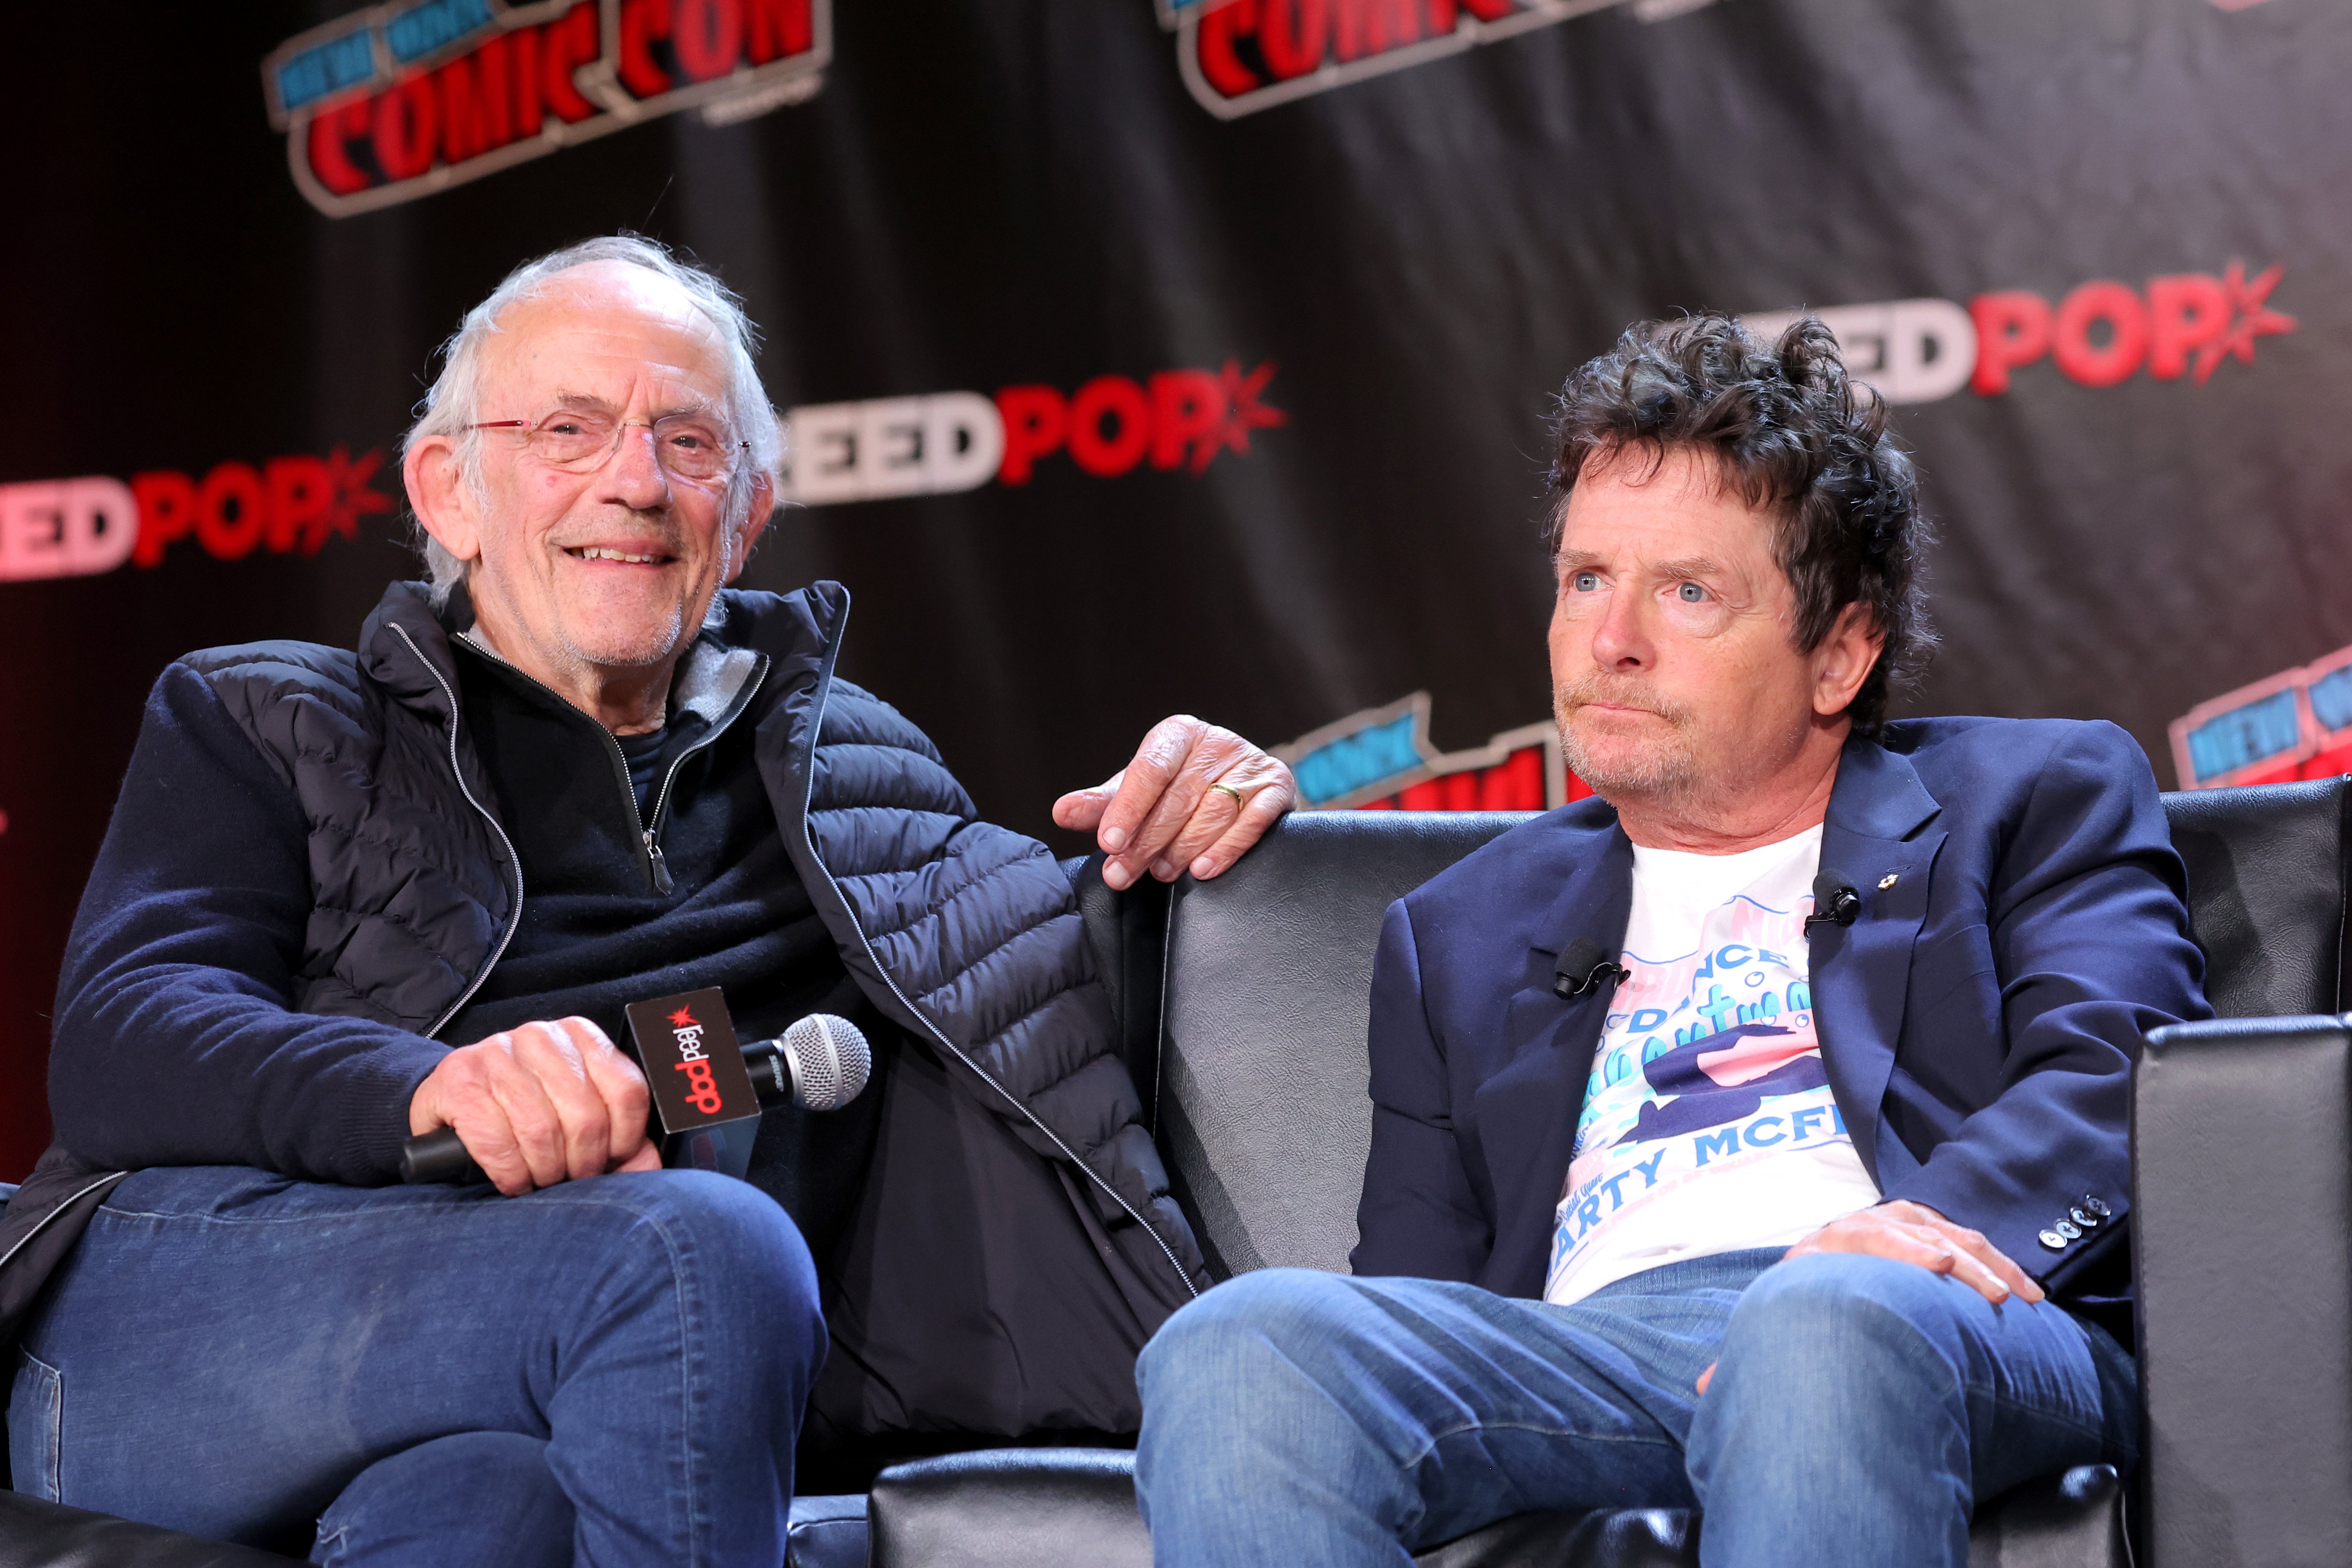 Christopher Lloyd and Michael J. Fox at a "Back To The Future" Reunion panel at New York Comic Con on October 8, 2022, in New York City | Source: Getty Images